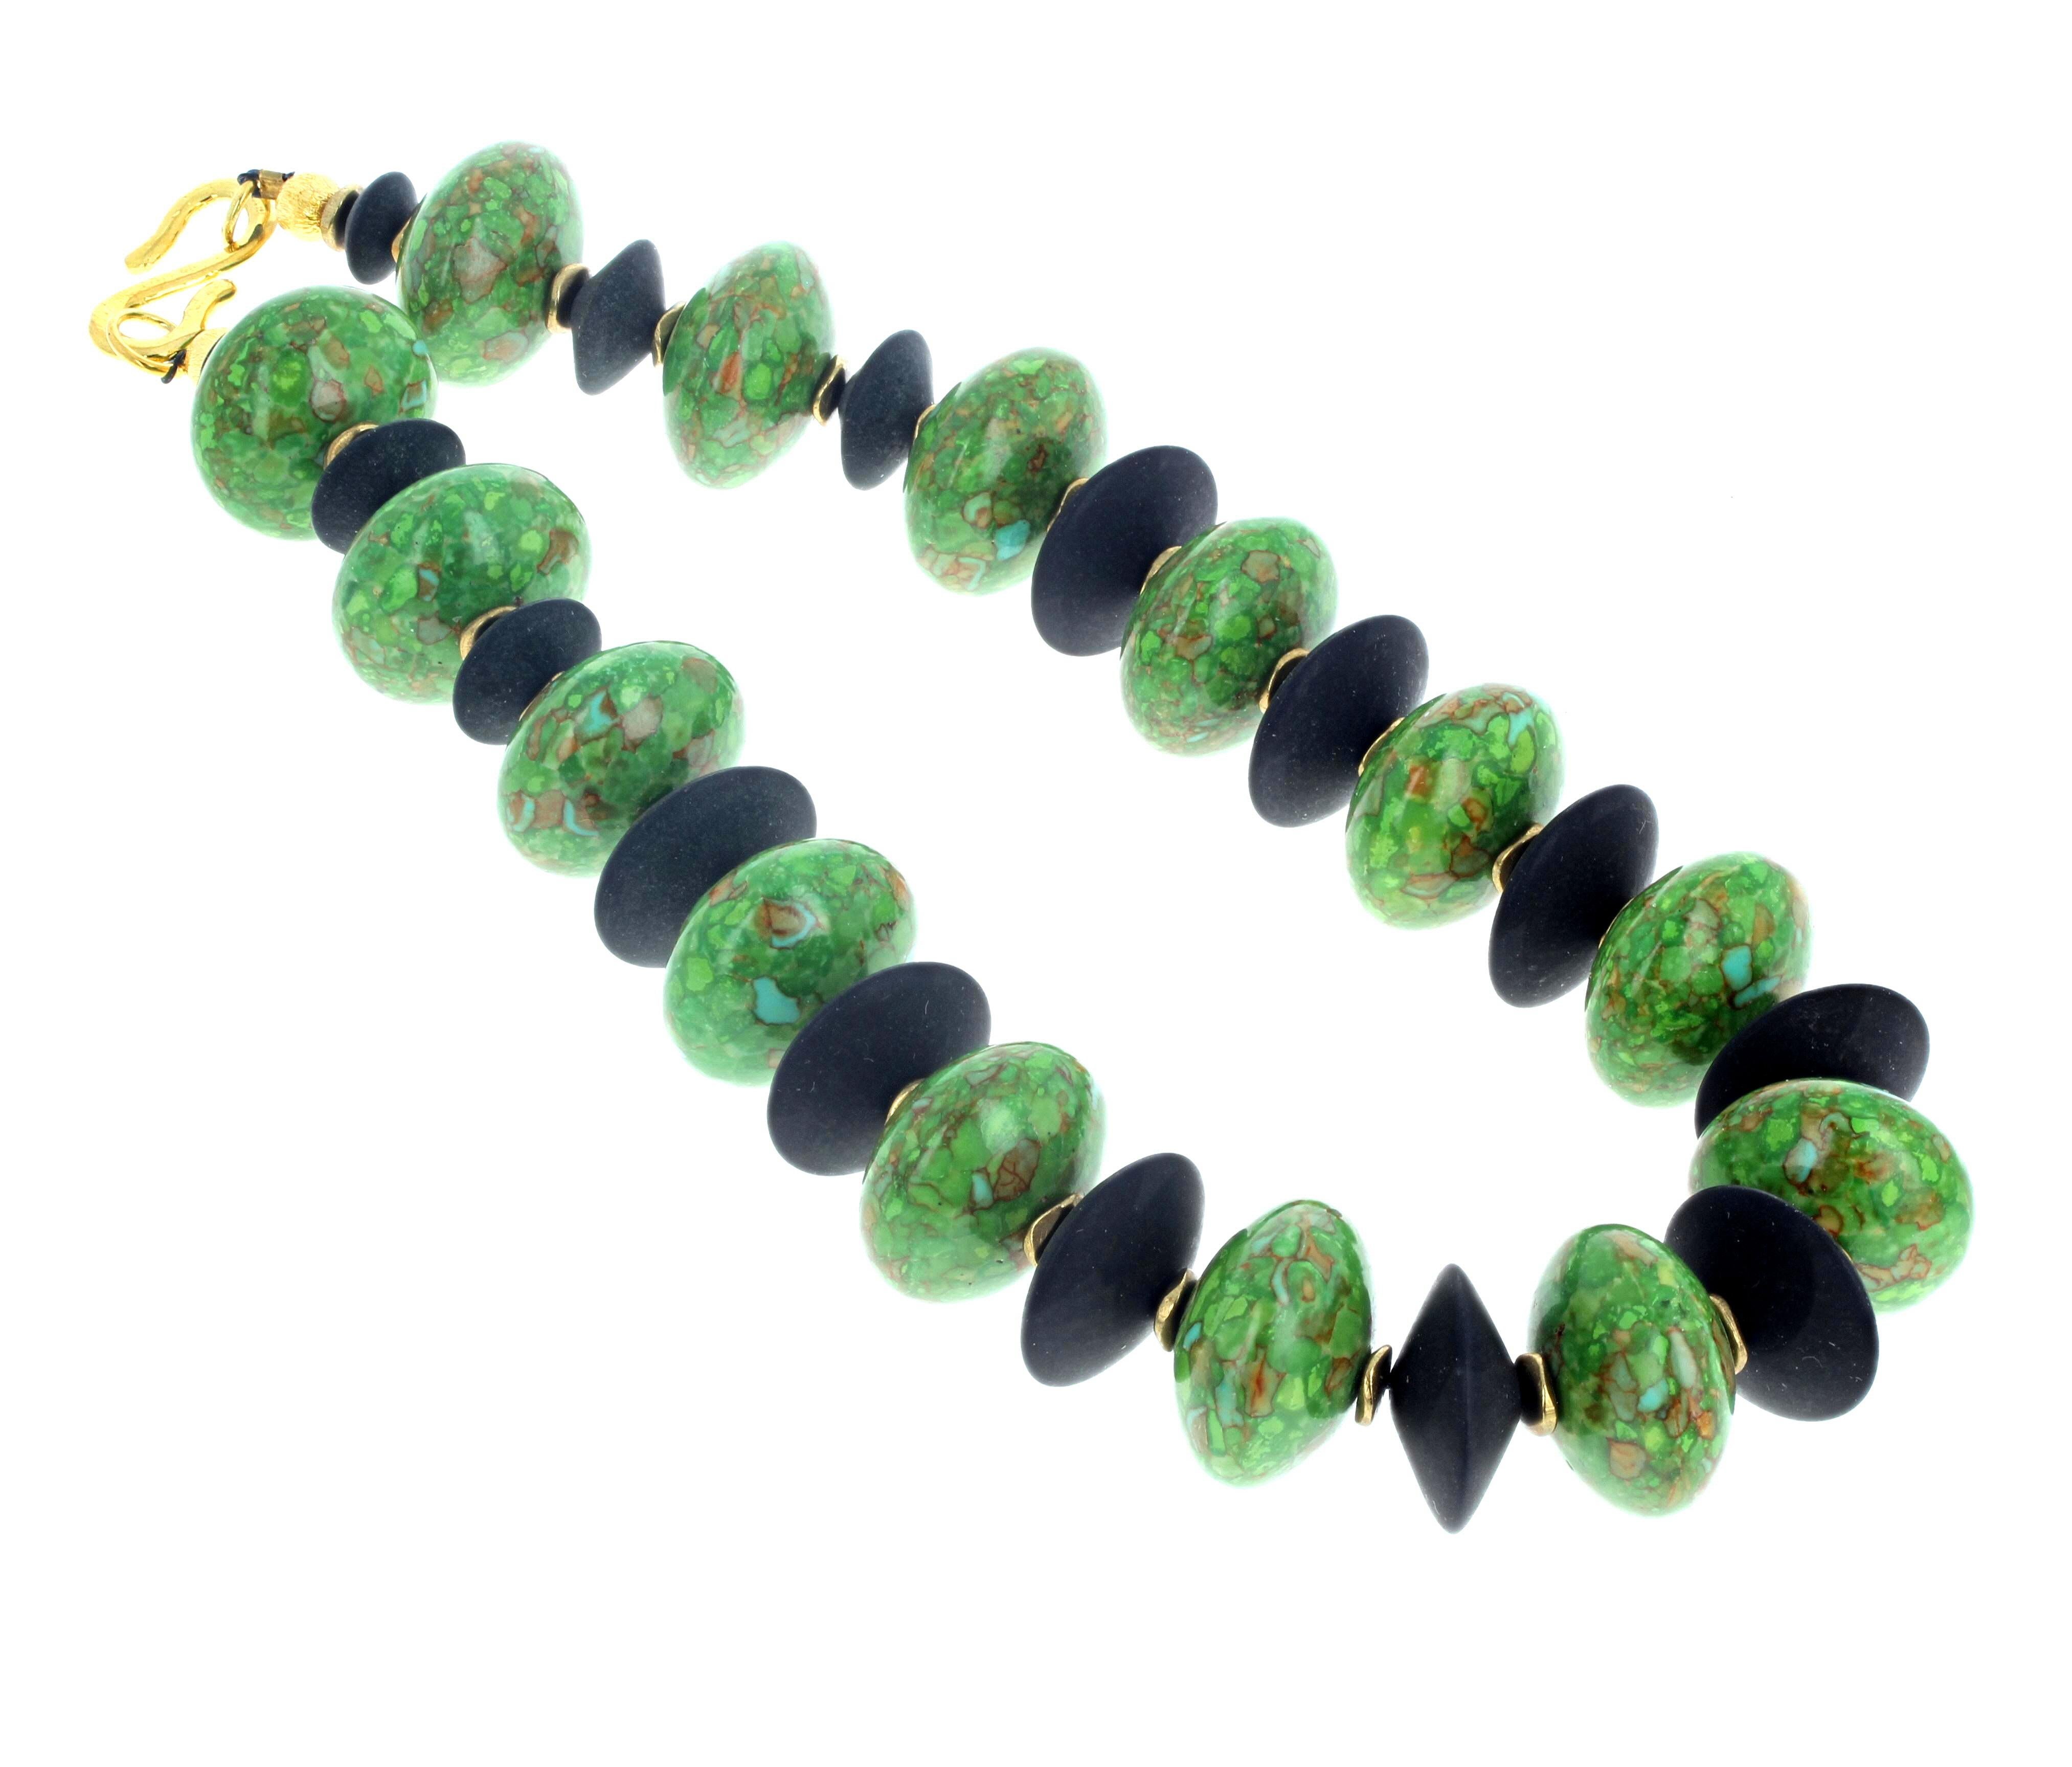 Beautiful natural green Turquoise enhanced with natural real black Onyx is 16 inches long.  The largest of the Green Turquoise is approximately 22mm.   The largest Black Onyx is approximately 20mm.  This lovely necklace has an easy to use gold